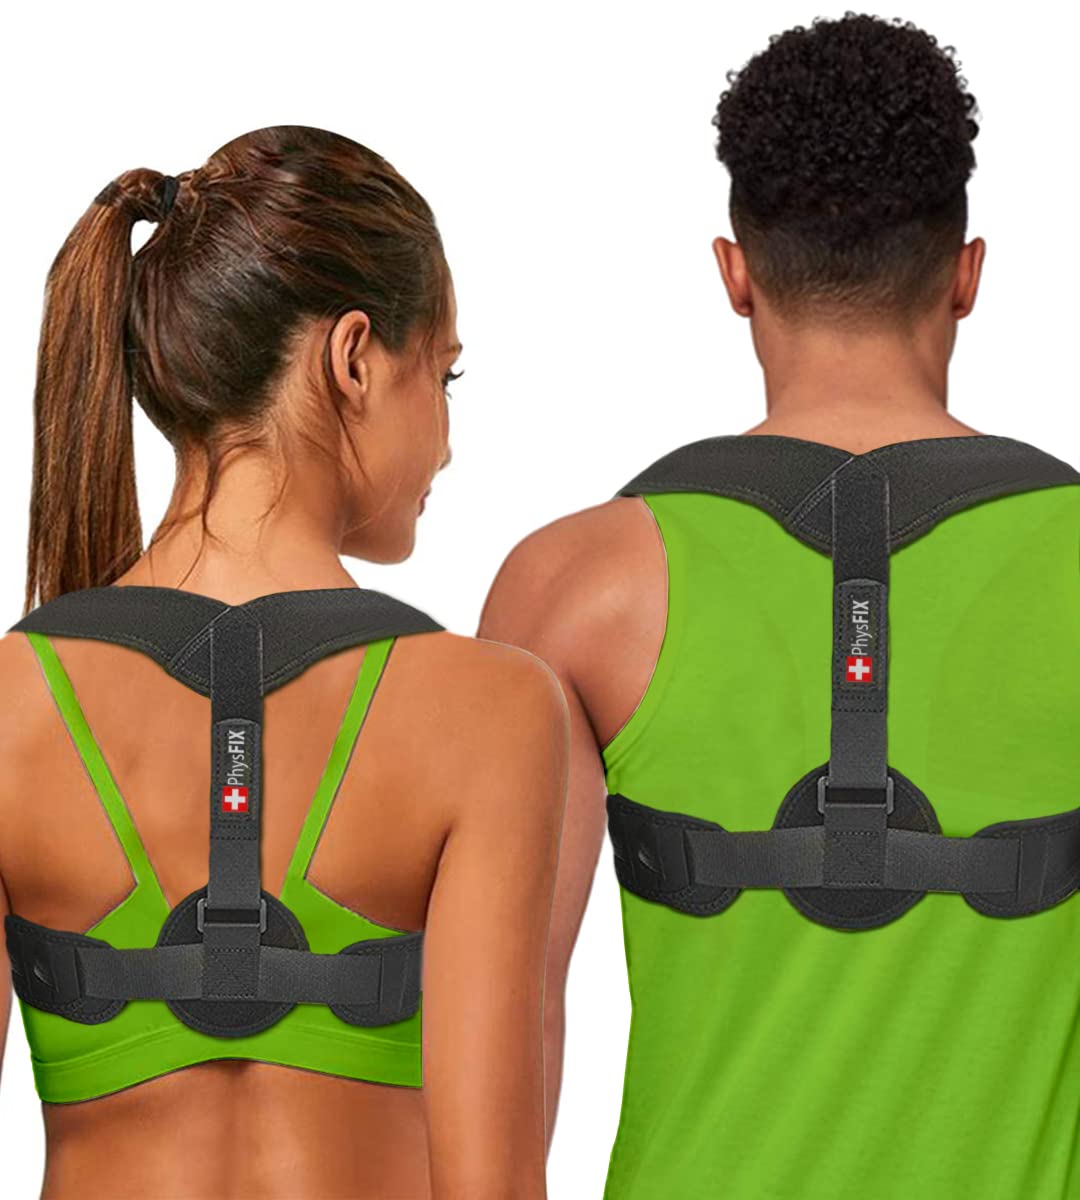 Posture Corrector For Men And Women- Adjustable Upper Back Brace For  Clavicle Support and Providing Pain Relief From Neck, Back and Shoulder